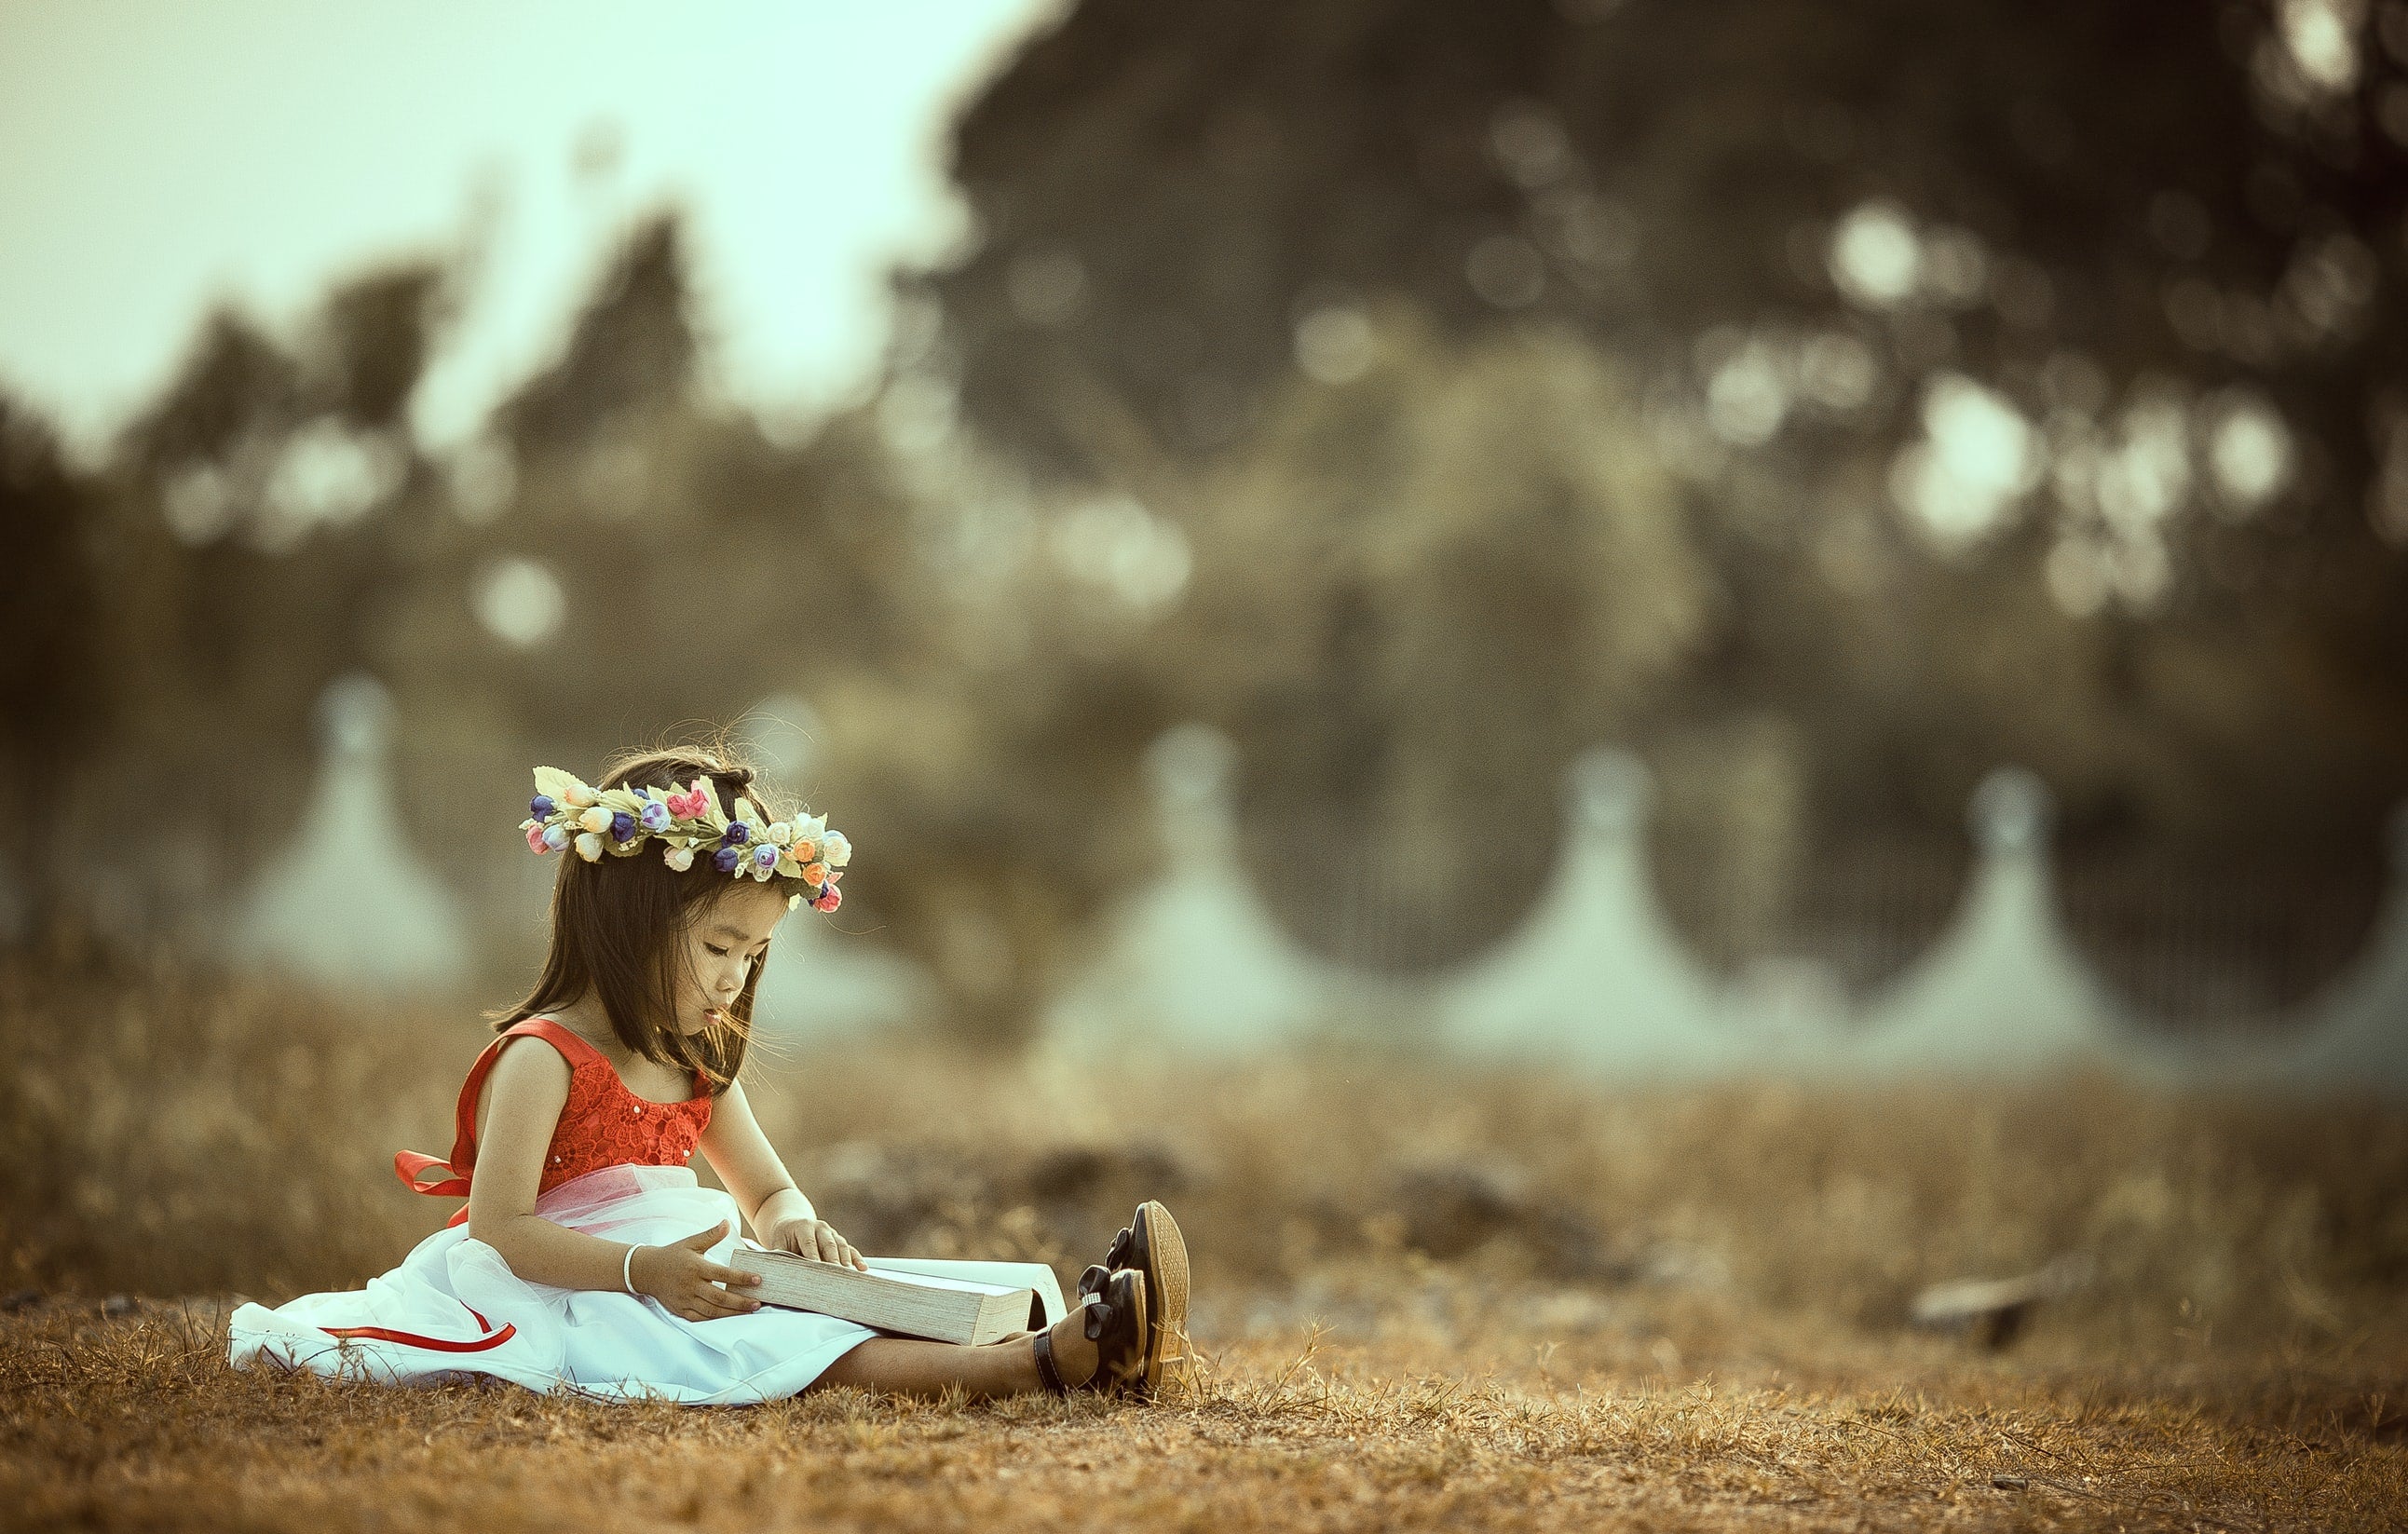 10 Favorite Inspiring Books for Young Girls